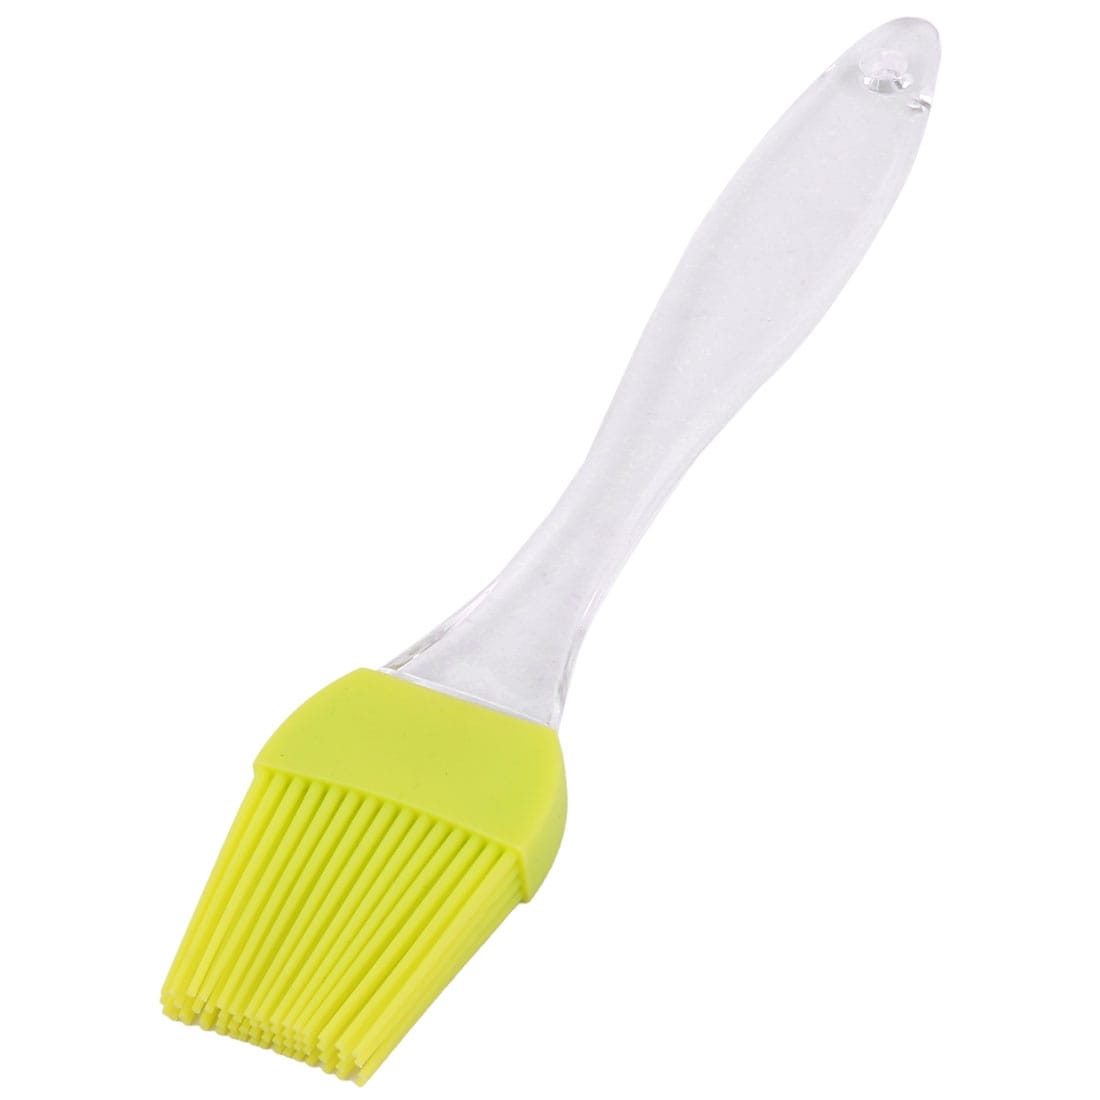 https://ak1.ostkcdn.com/images/products/is/images/direct/a3e565ca04bb1ae628c3c058d2ce6fb20cdfd18a/Baking-Barbecue-Silicone-Head-Heat-Resistant-Oil-Condiment-Pastry-Brush-Green.jpg